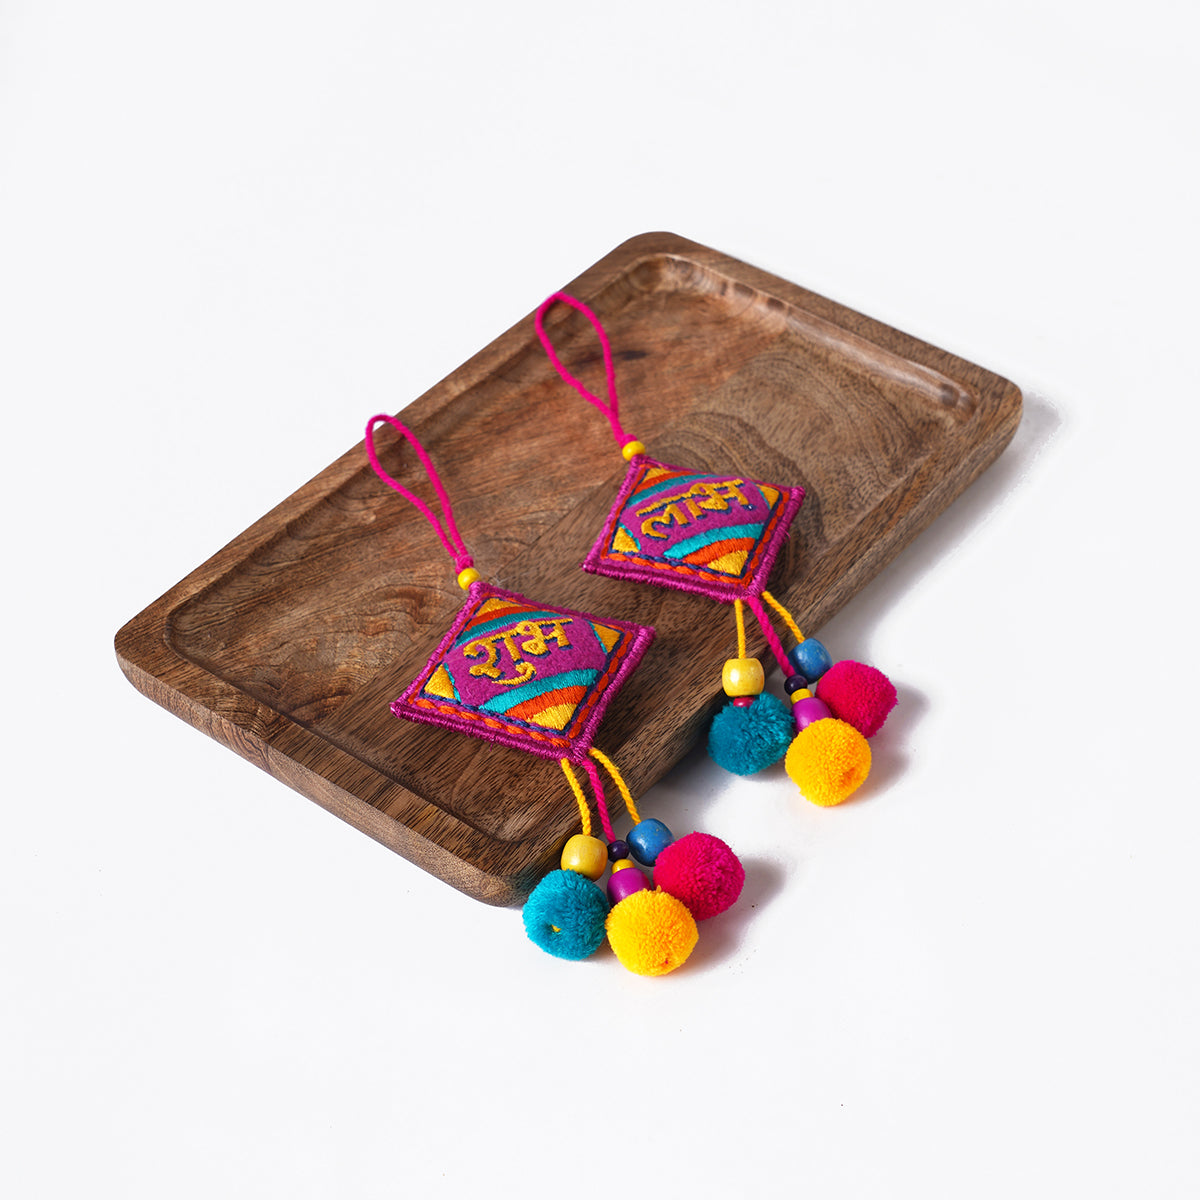 DIWALI GIFT PACK - Natural finish wooden snack tray with pair of SHUBH-LABH tassels